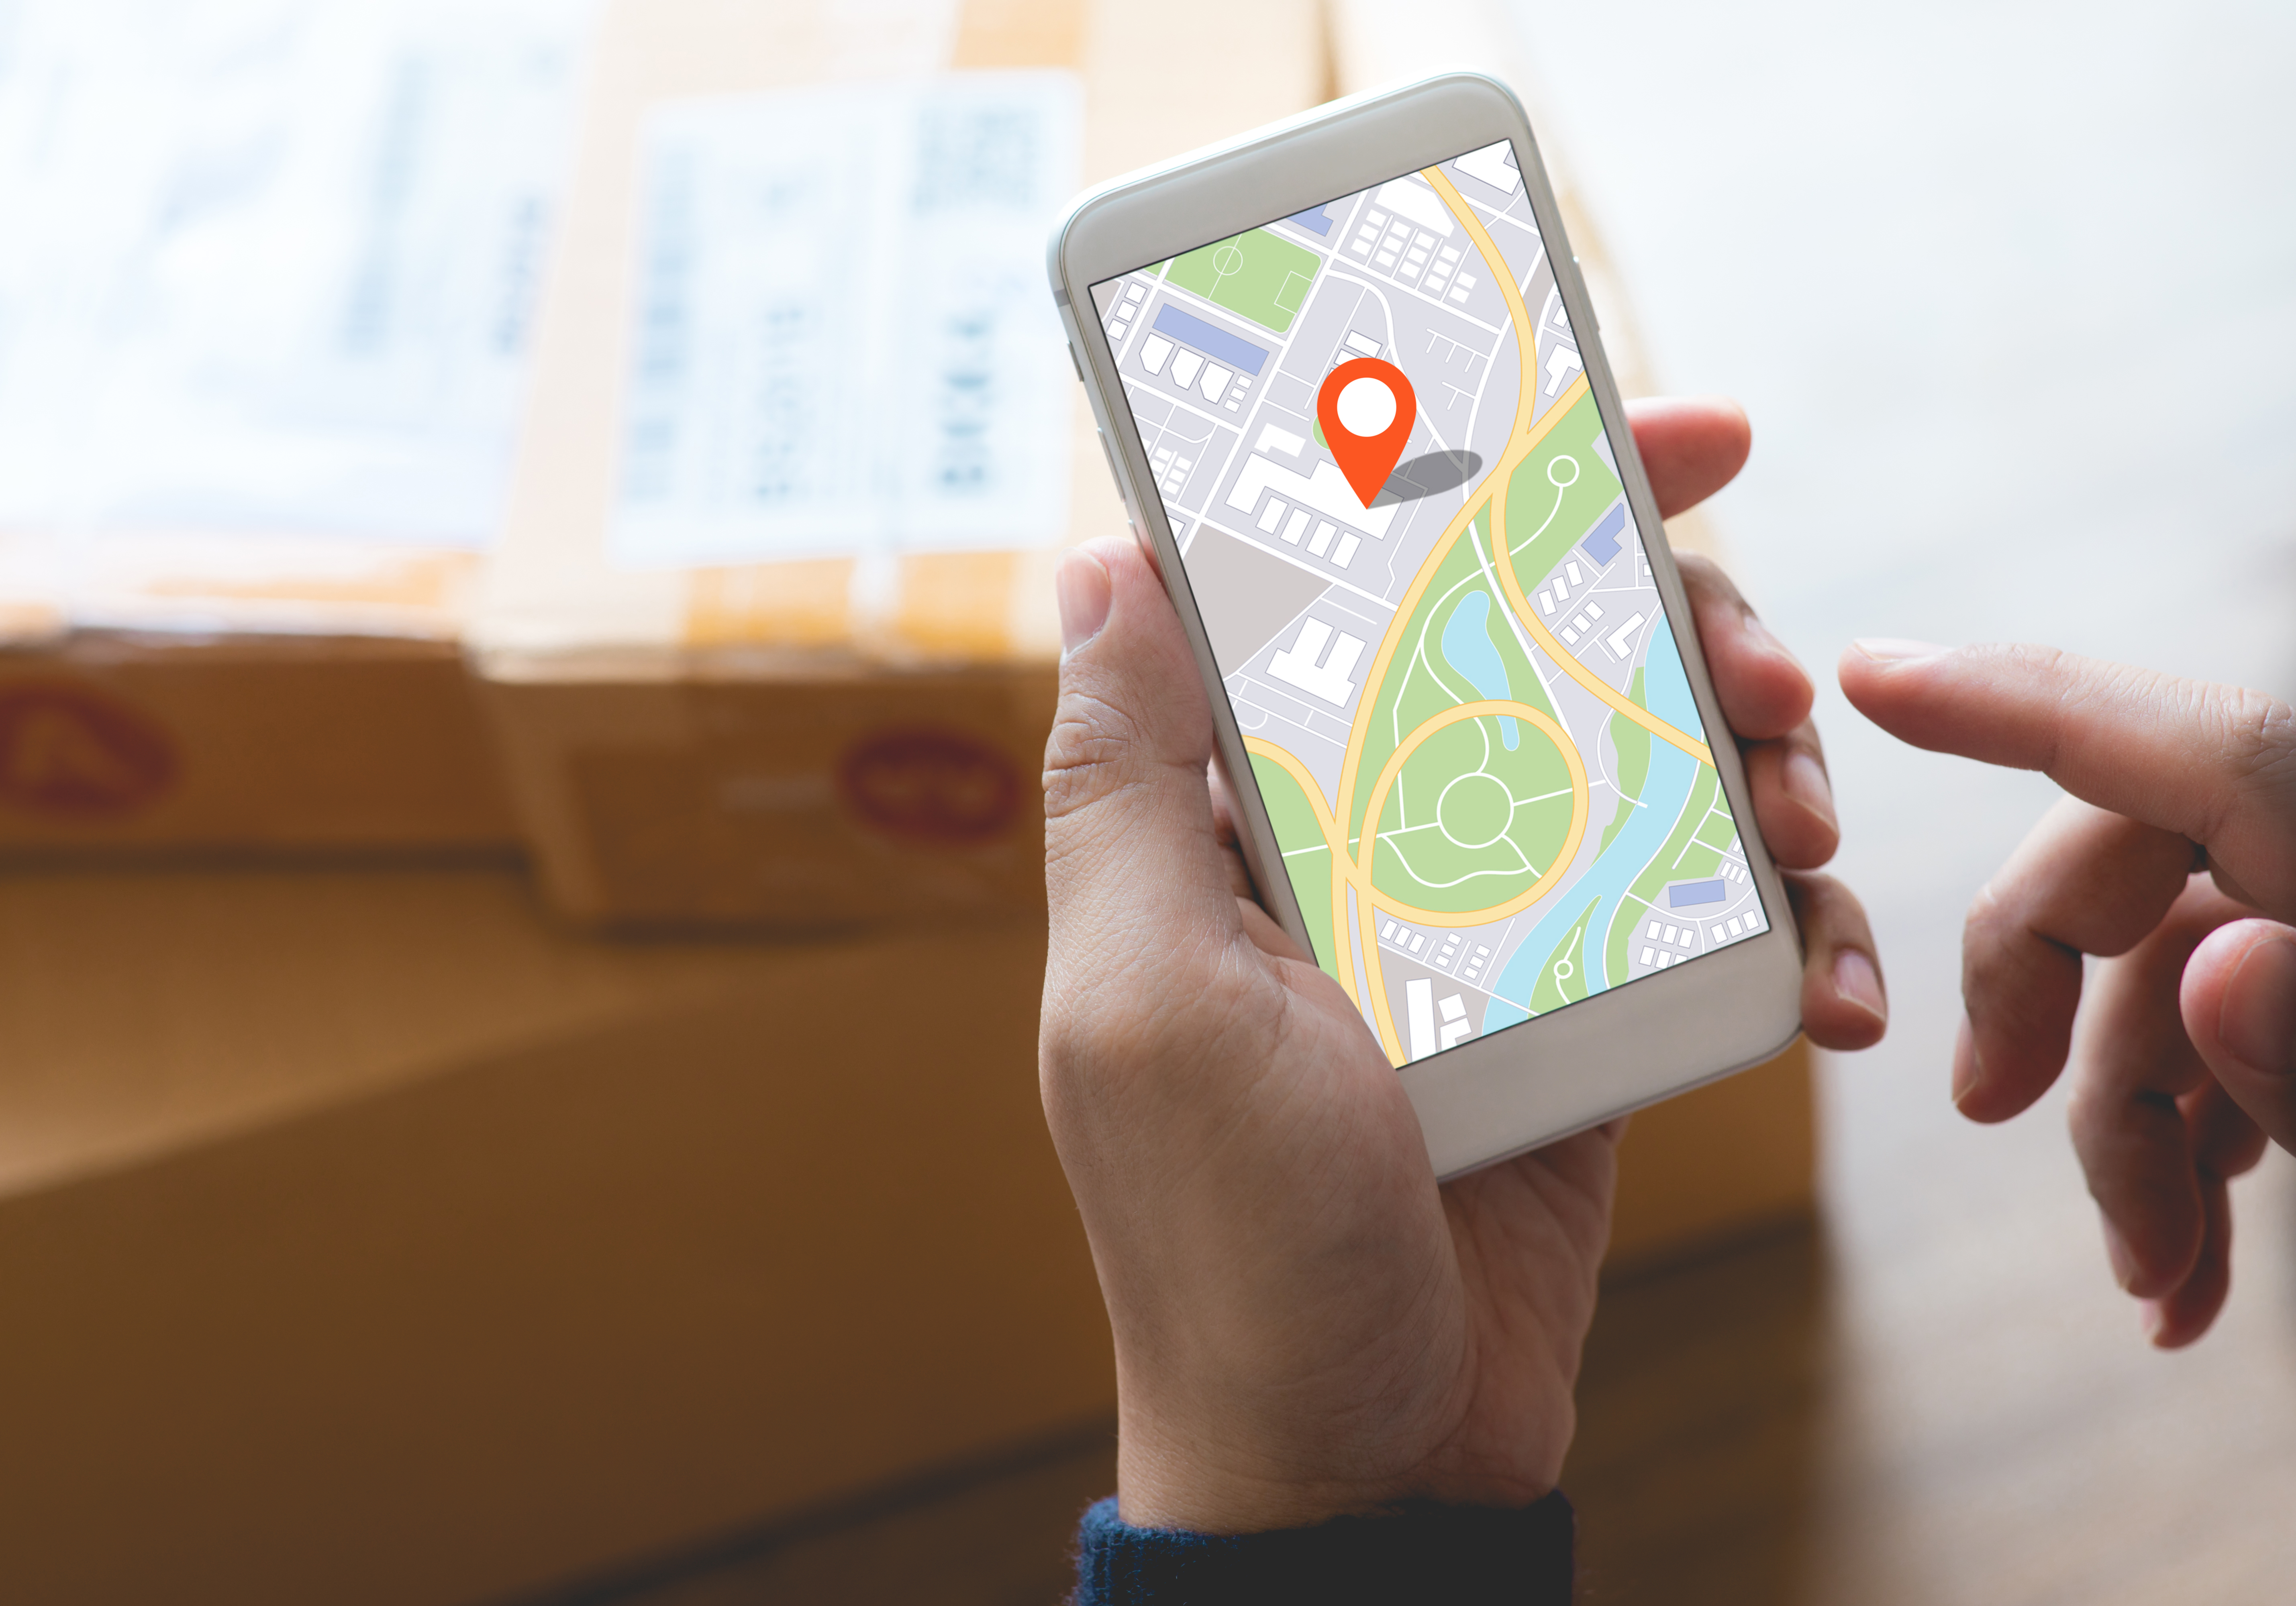 Delivery and online shopping concepts with young person using digital map with smartphone on product package box.Ecommerce market.Transportation logistic.Business retail.